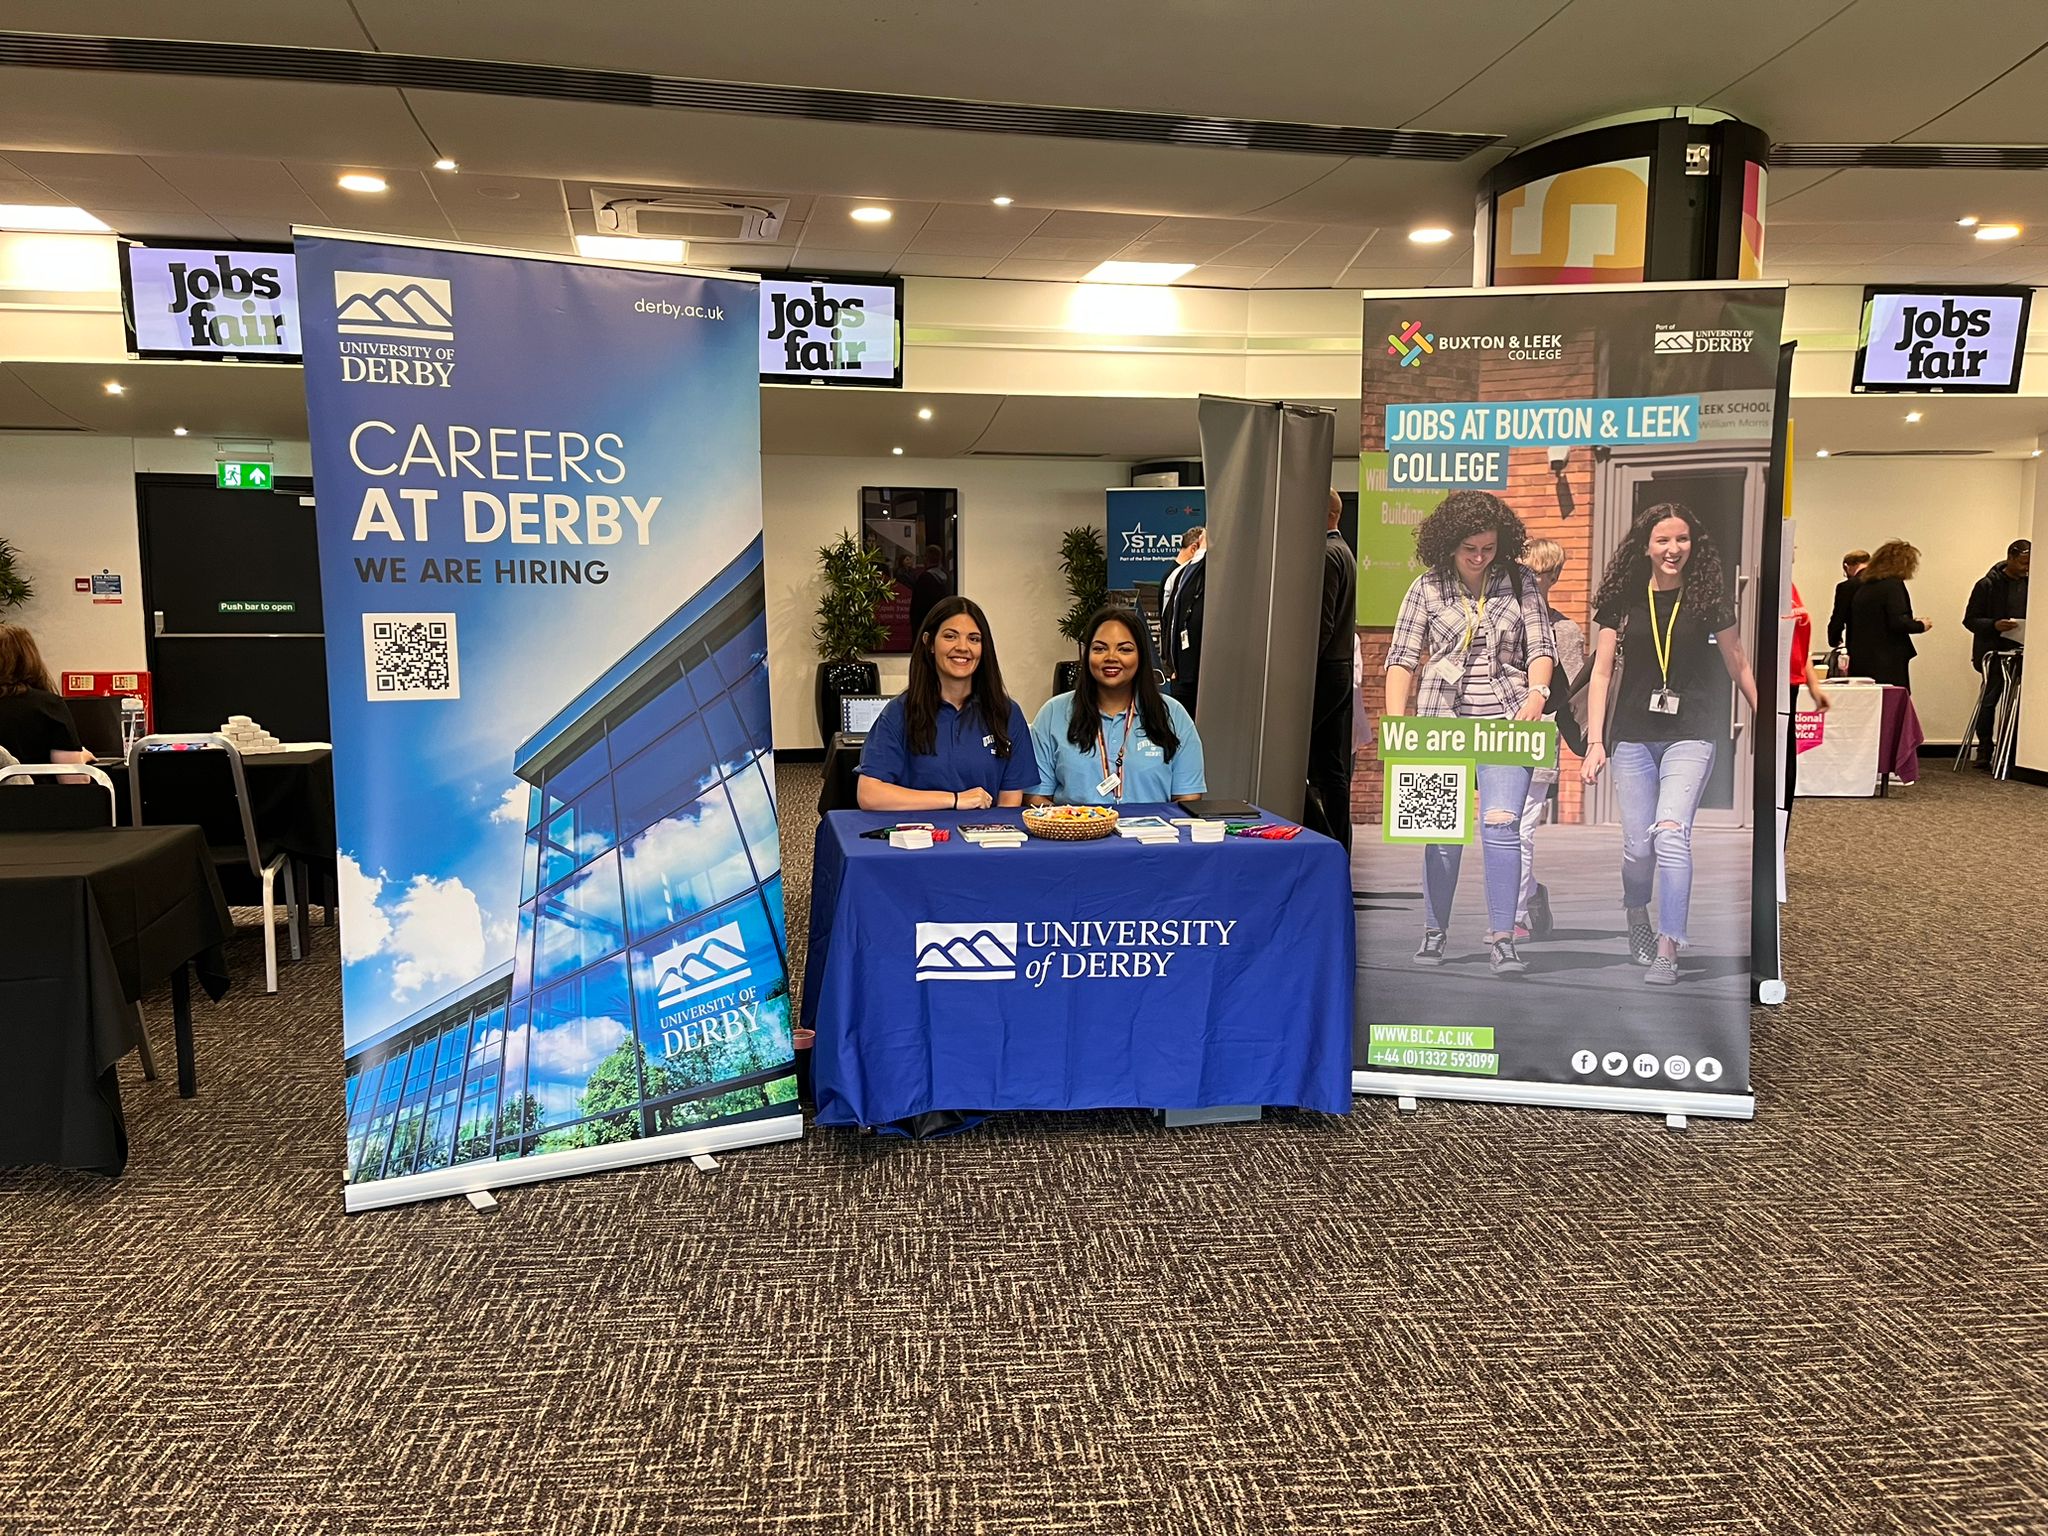 University of Derby at our event in Derby